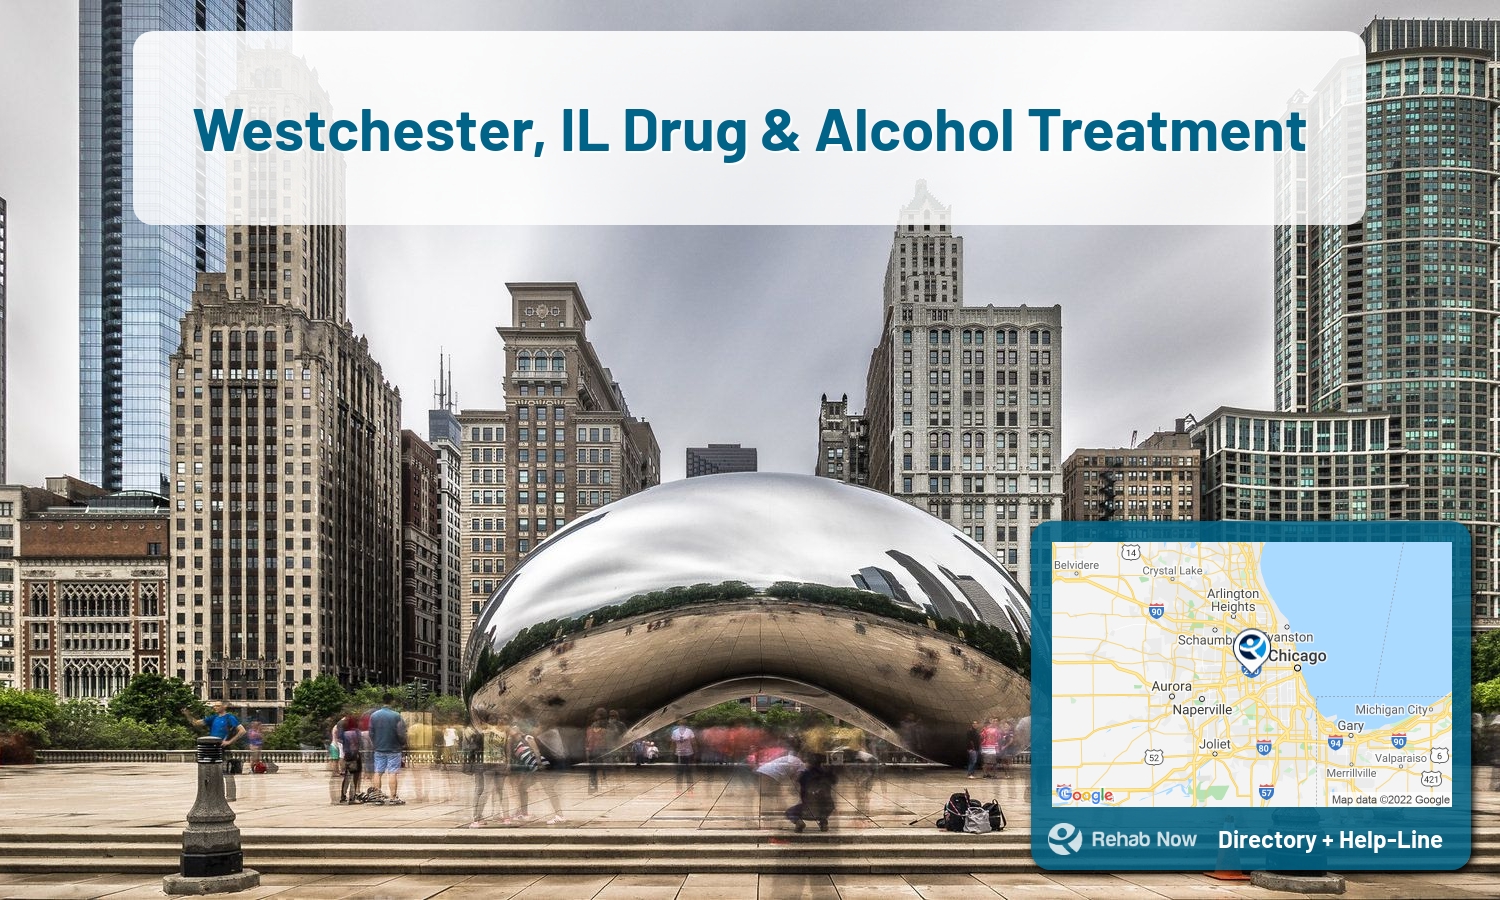 View options, availability, treatment methods, and more, for drug rehab and alcohol treatment in Westchester, Illinois